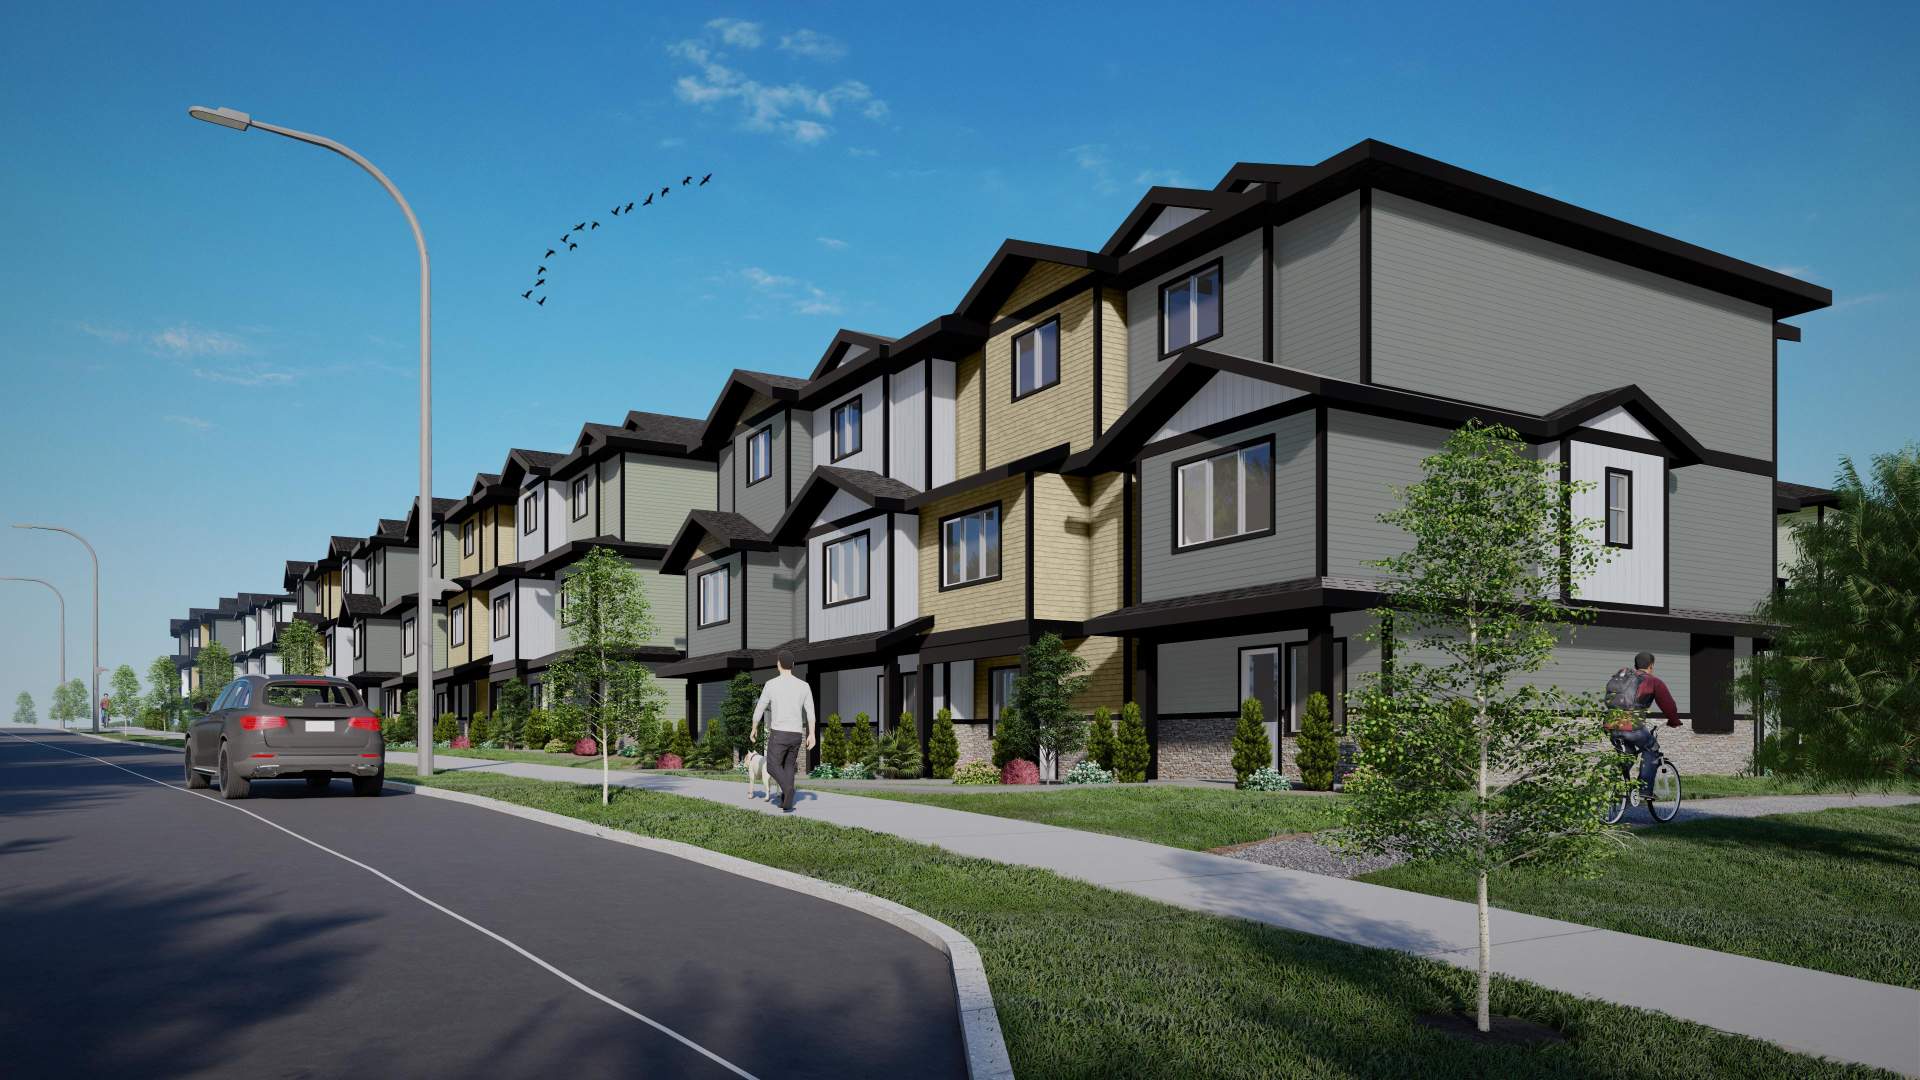 A collection of 47 three-bedroom South Nanaimo townhomes.